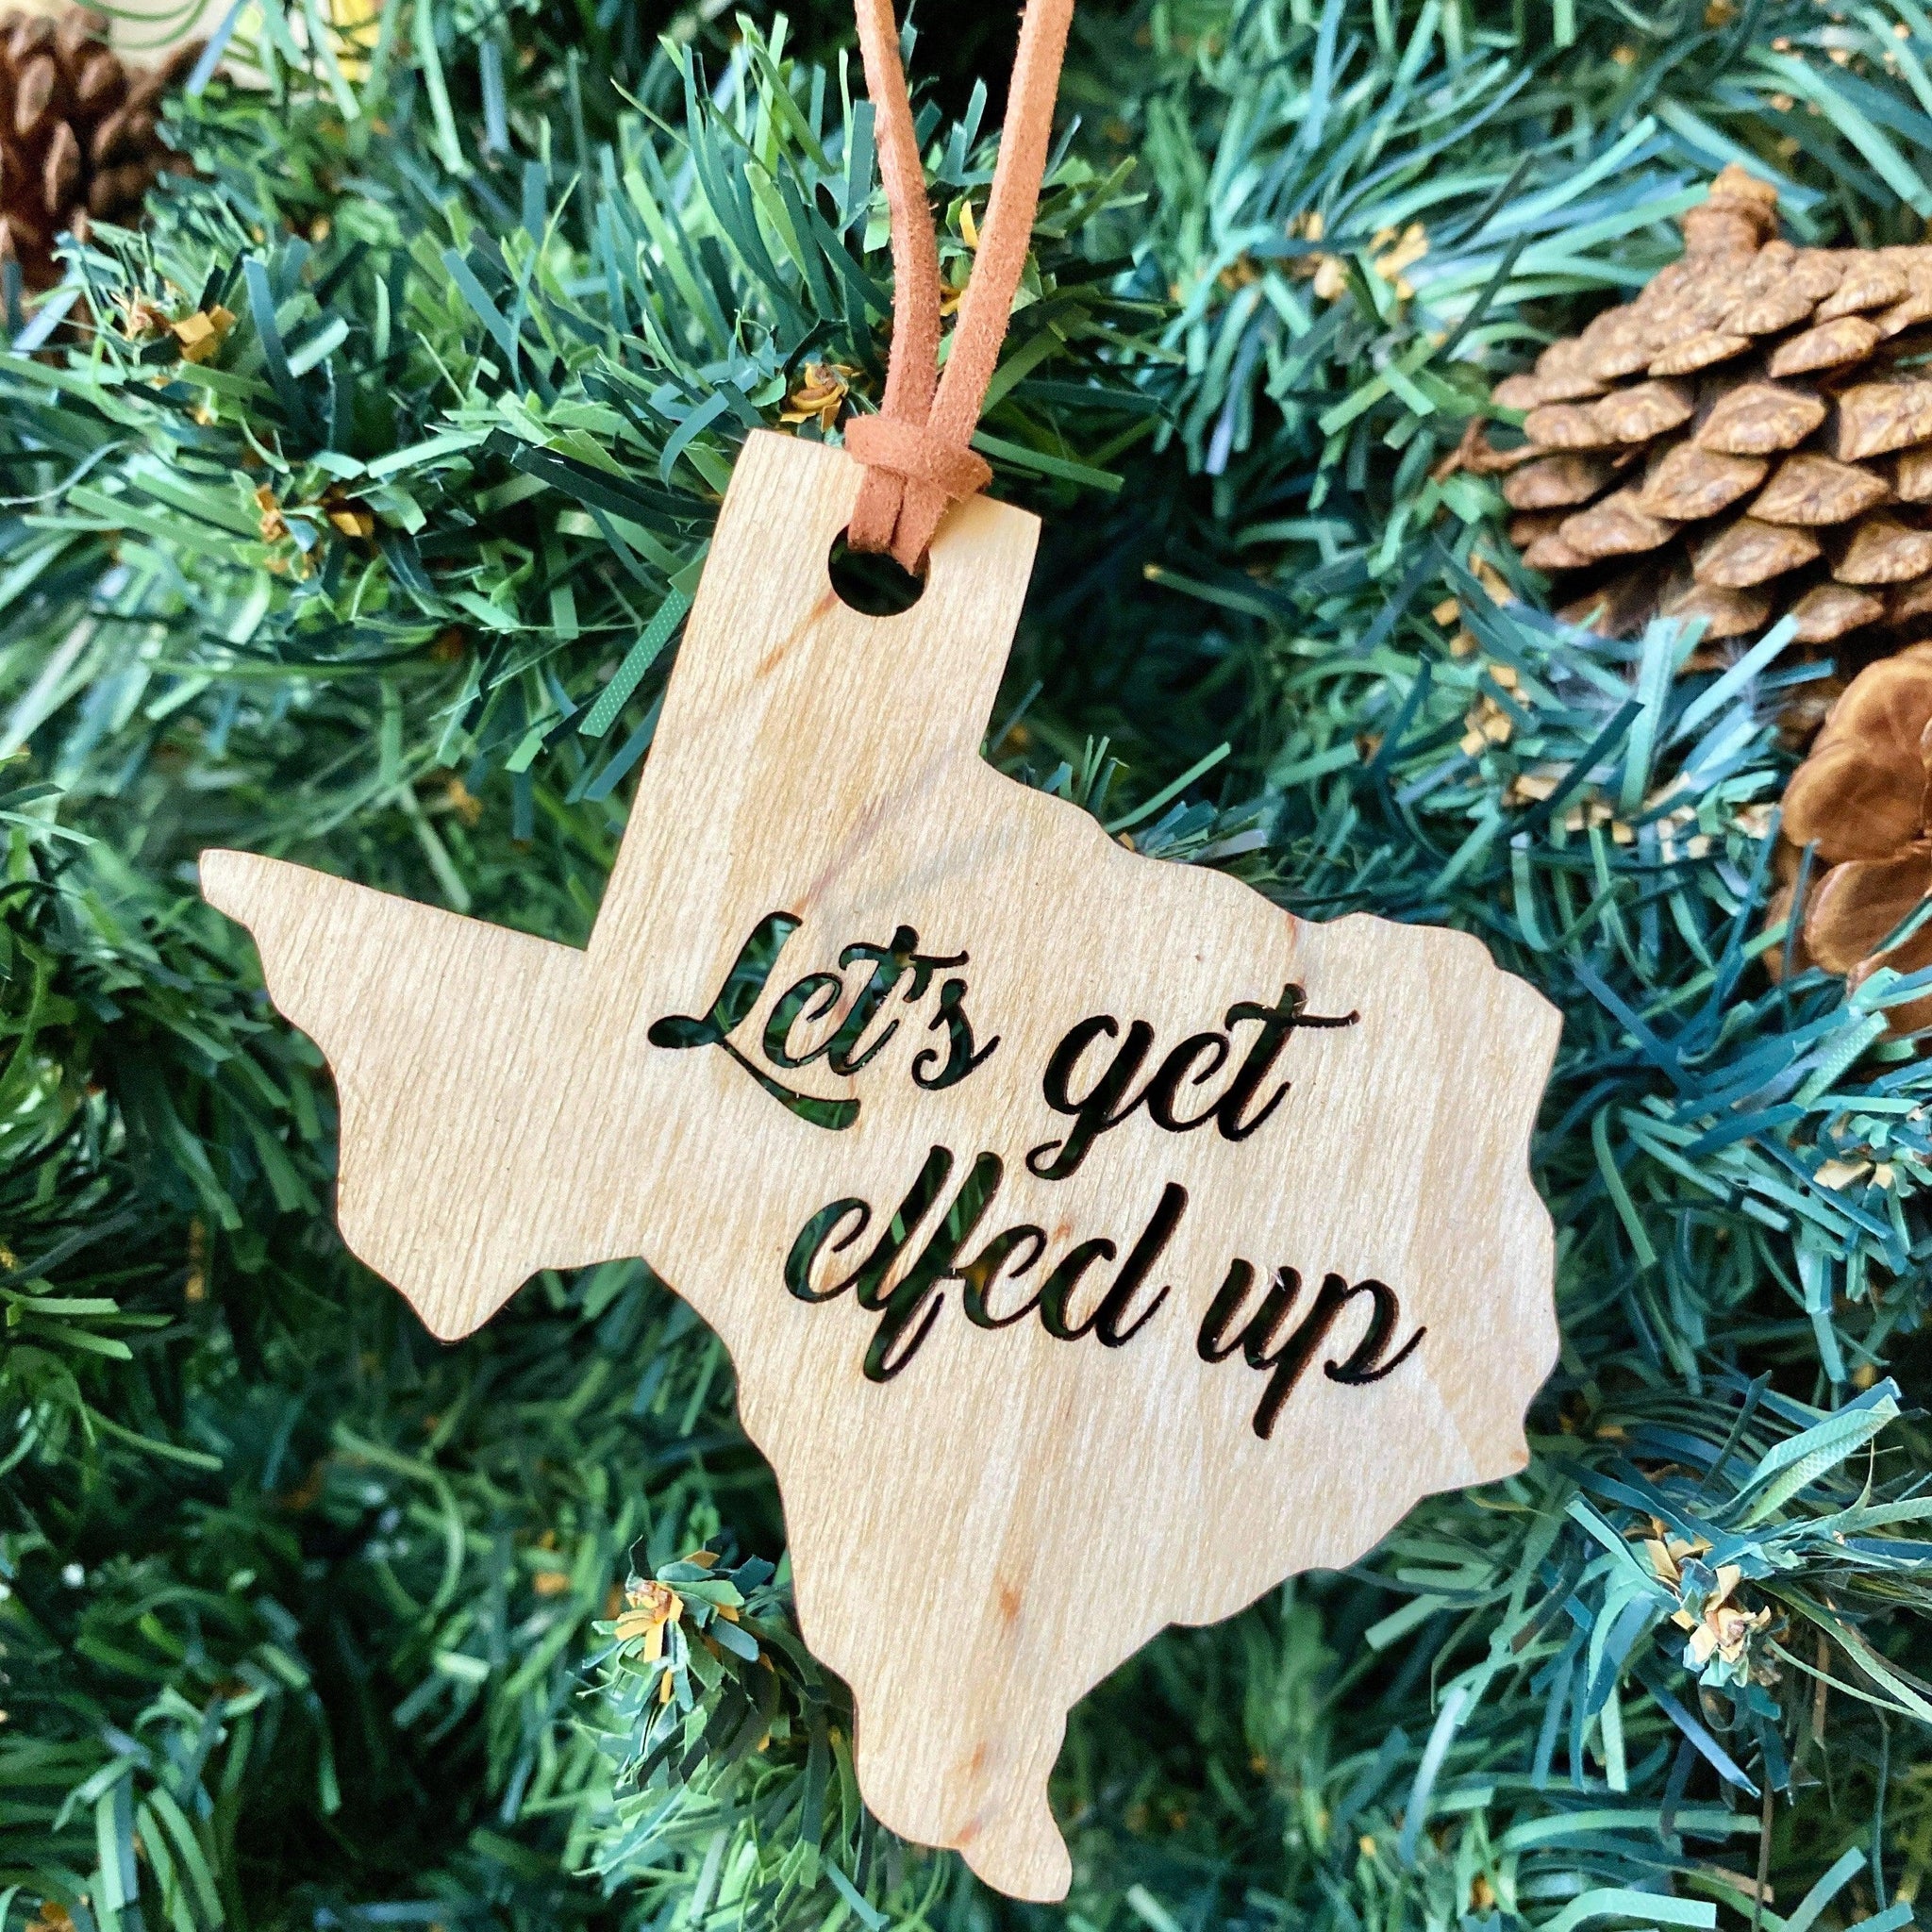 Let’s get Elfed up! Texas Ornament, Holiday Statement Ornament, Keepsake Christmas Ornament, Texas State Christmas Ornament - Espacio Handmade